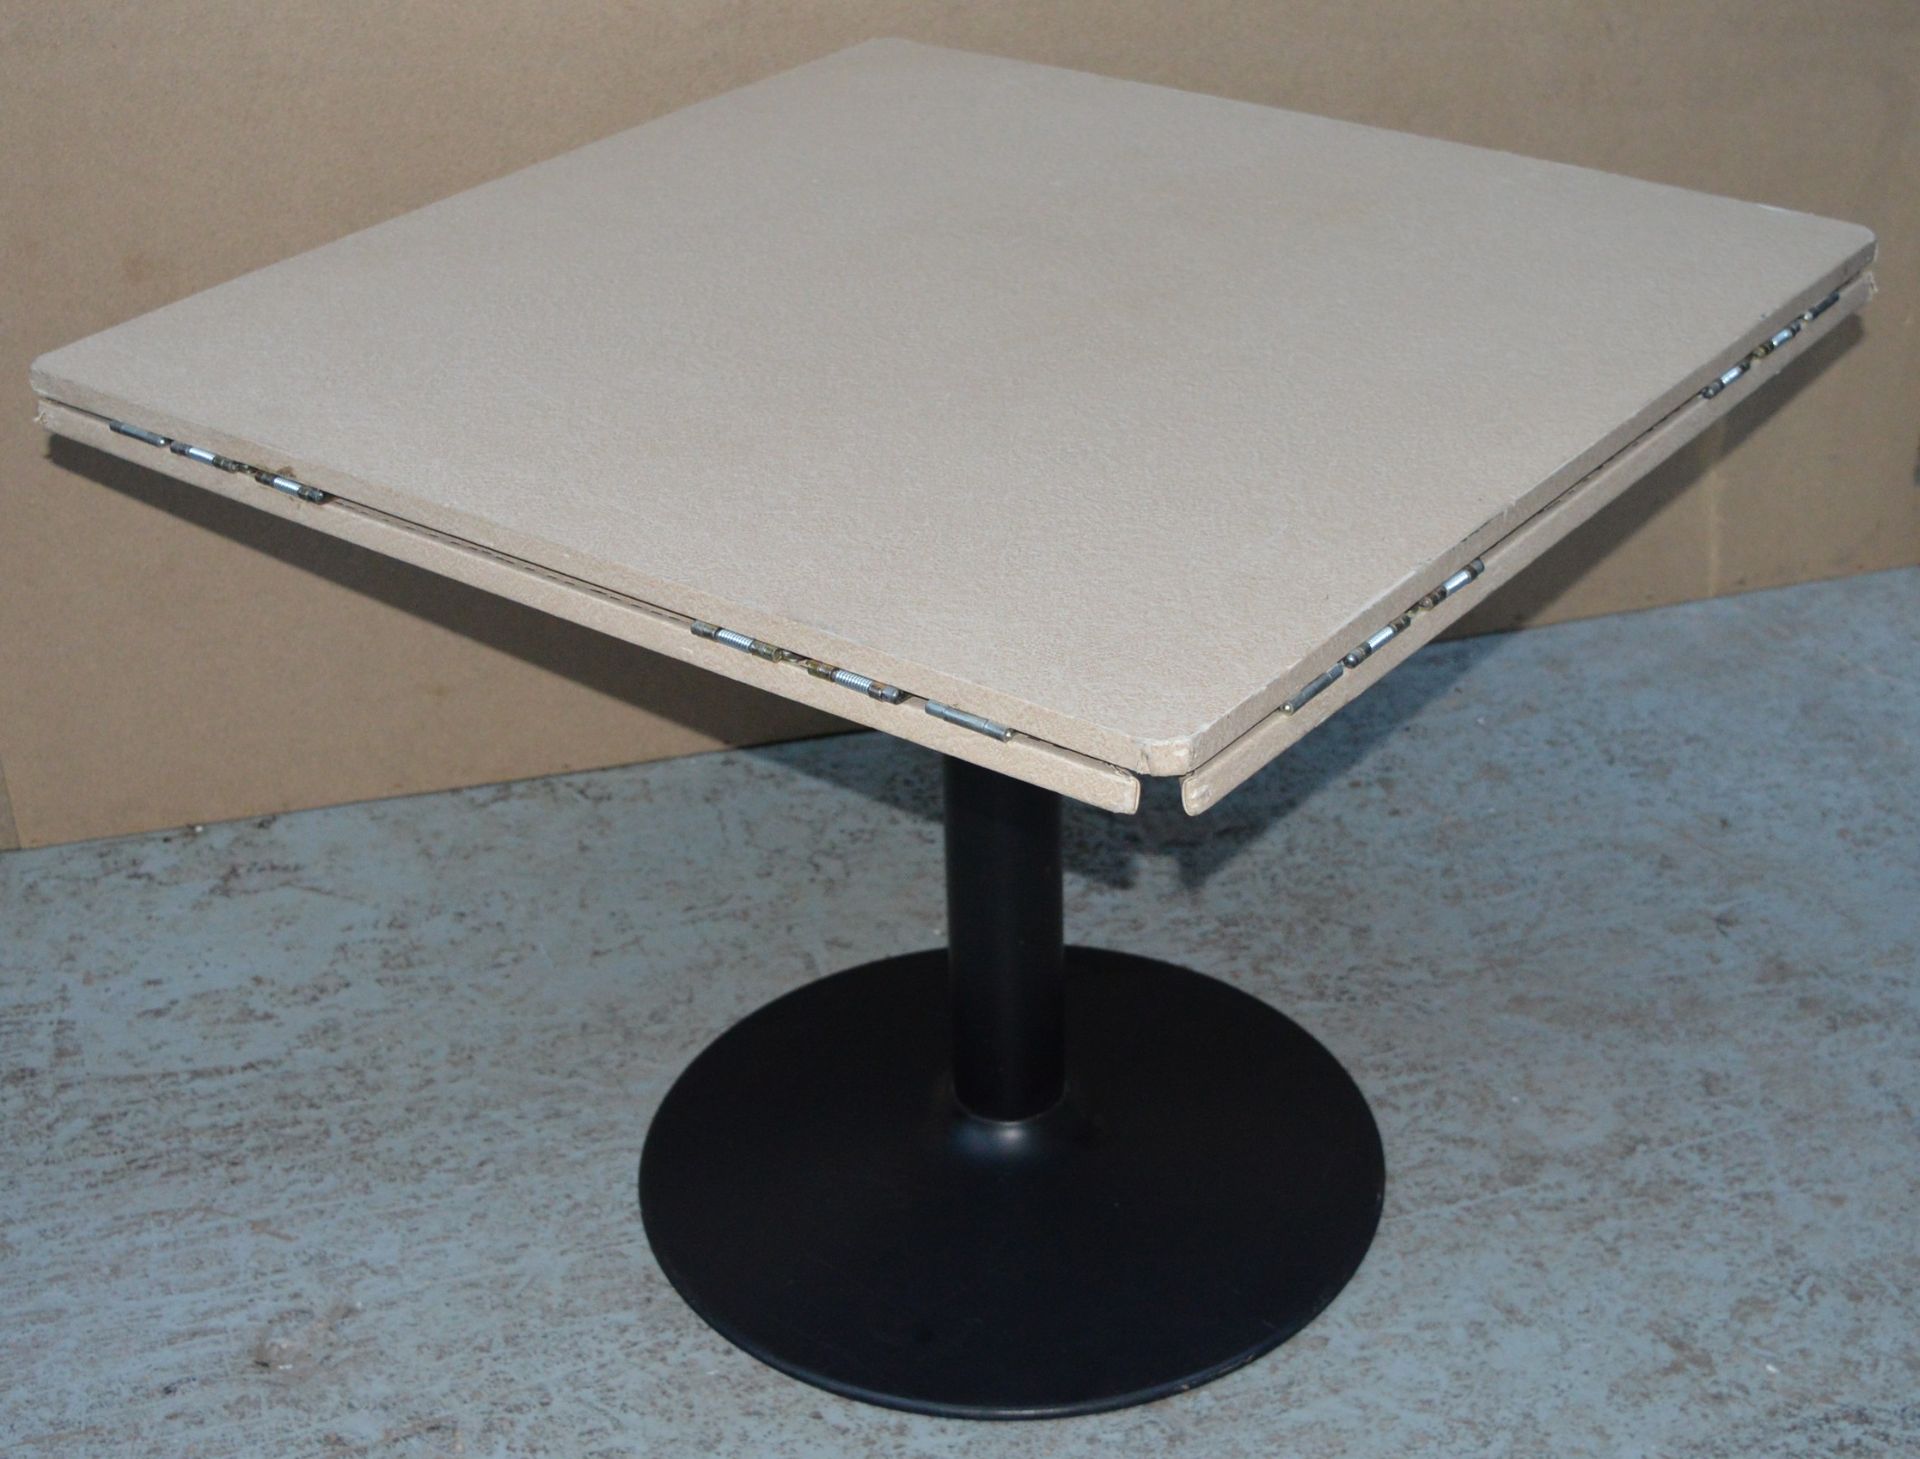 1 x Round to Square Dining Table - Square Dining Table With Folding Round Drop Leaf Ends and - Image 2 of 9